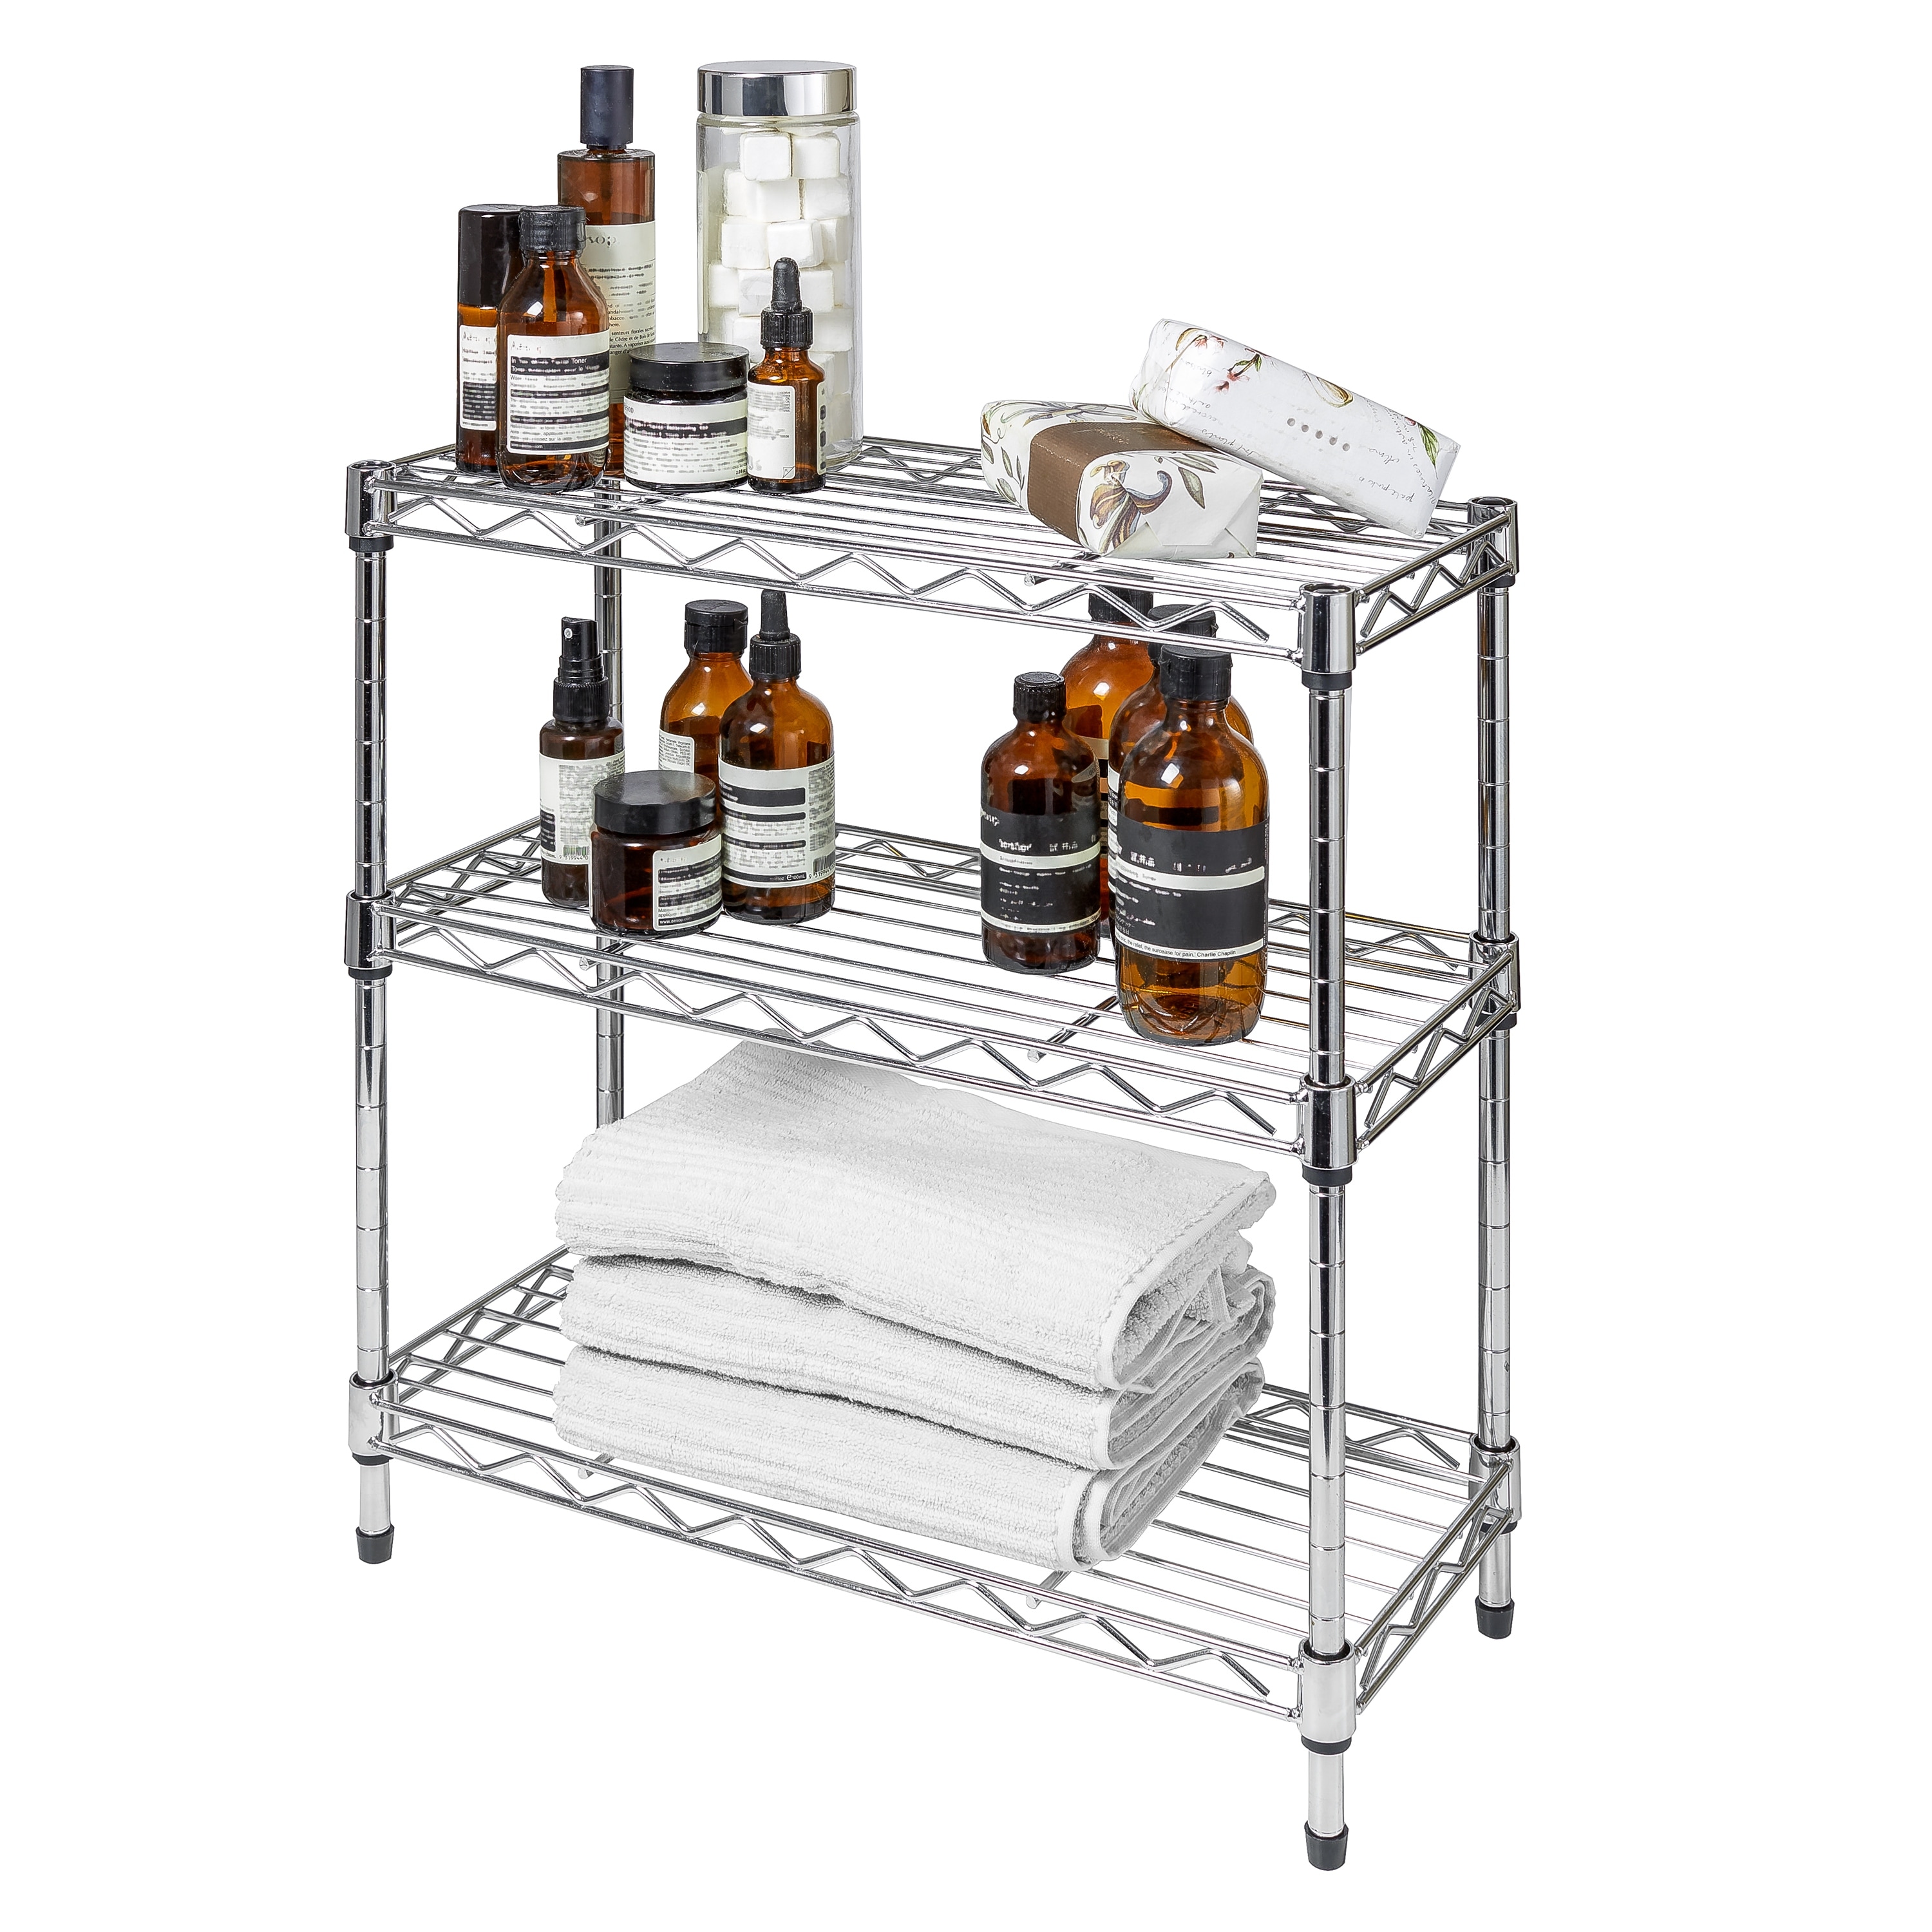 https://ak1.ostkcdn.com/images/products/is/images/direct/610344ed9eb2a10128d1afed27ba913b0a810a8f/Seville-Classics-3-Tier-Steel-Wire-Shelving%2C-17.5%22-W-x-7.5%22-D-x-18.5%22-H.jpg